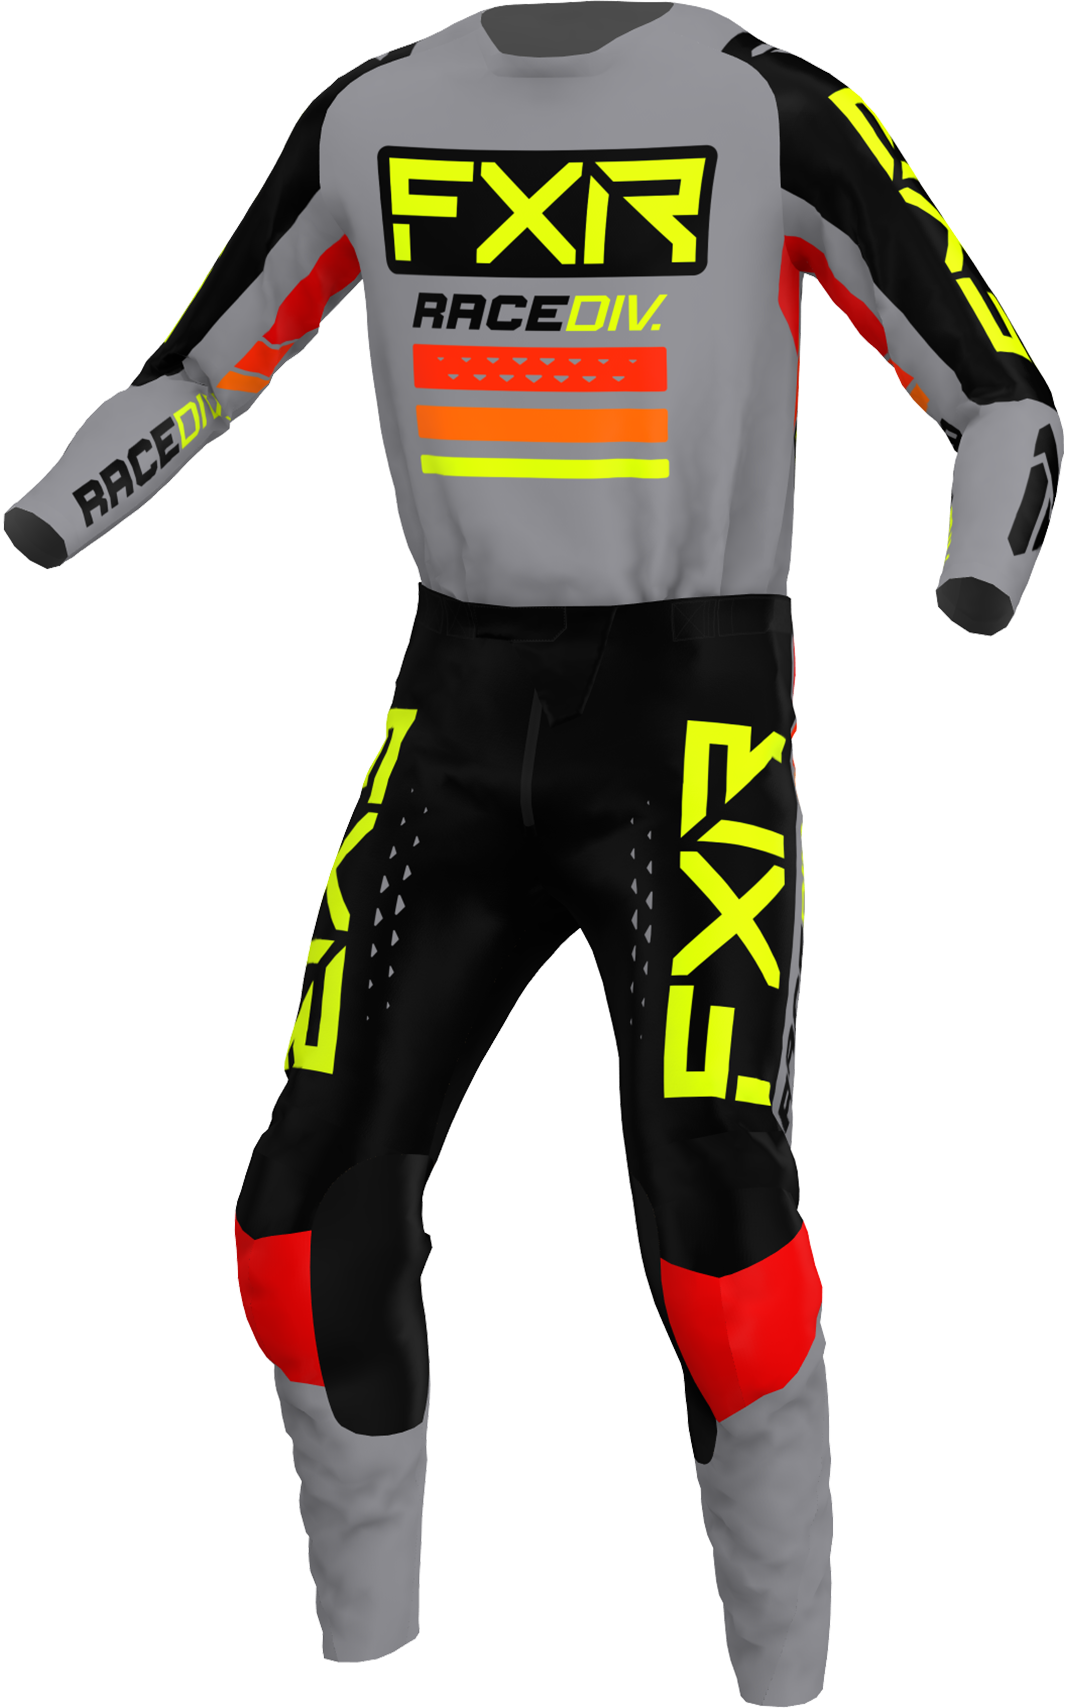 A 3D image of FXR’s Clutch Pro MX Jersey and Pant 22 in Grey / Black / Hivis colorway